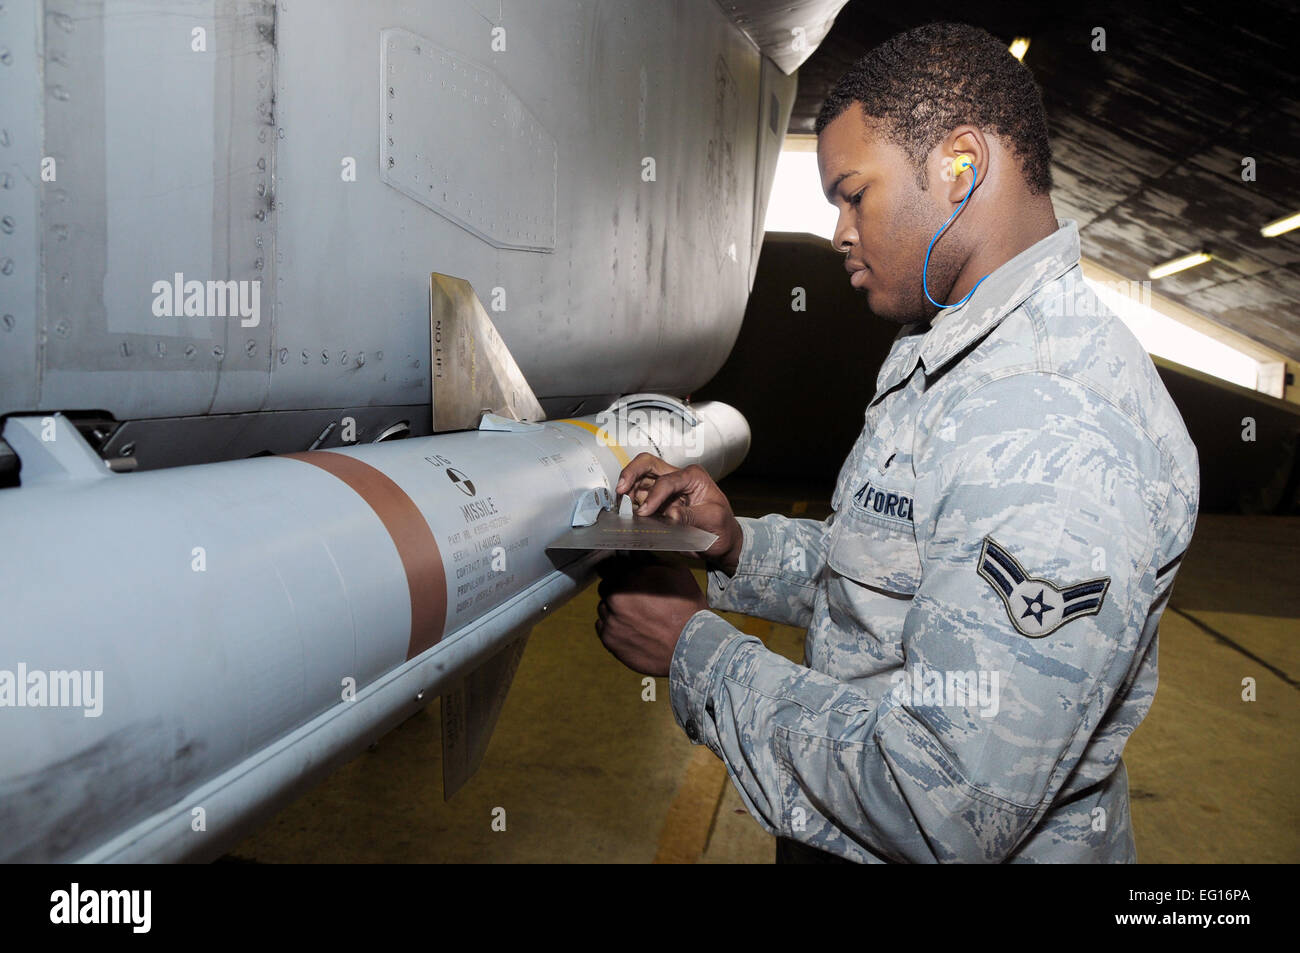 Airman 1st Class Billy Reams gives the final touches to the munitions load by securing the last fins on an AIM-120 Advanced Medium-Range Air-to-Air Missile Sept. 23, 2010, at Keflavik, Iceland.  Airman Reams is a team member of the 493rd Expeditionary Fighter Squadron Weapons Load Crew.  Senior Airman Stephen Linch Stock Photo